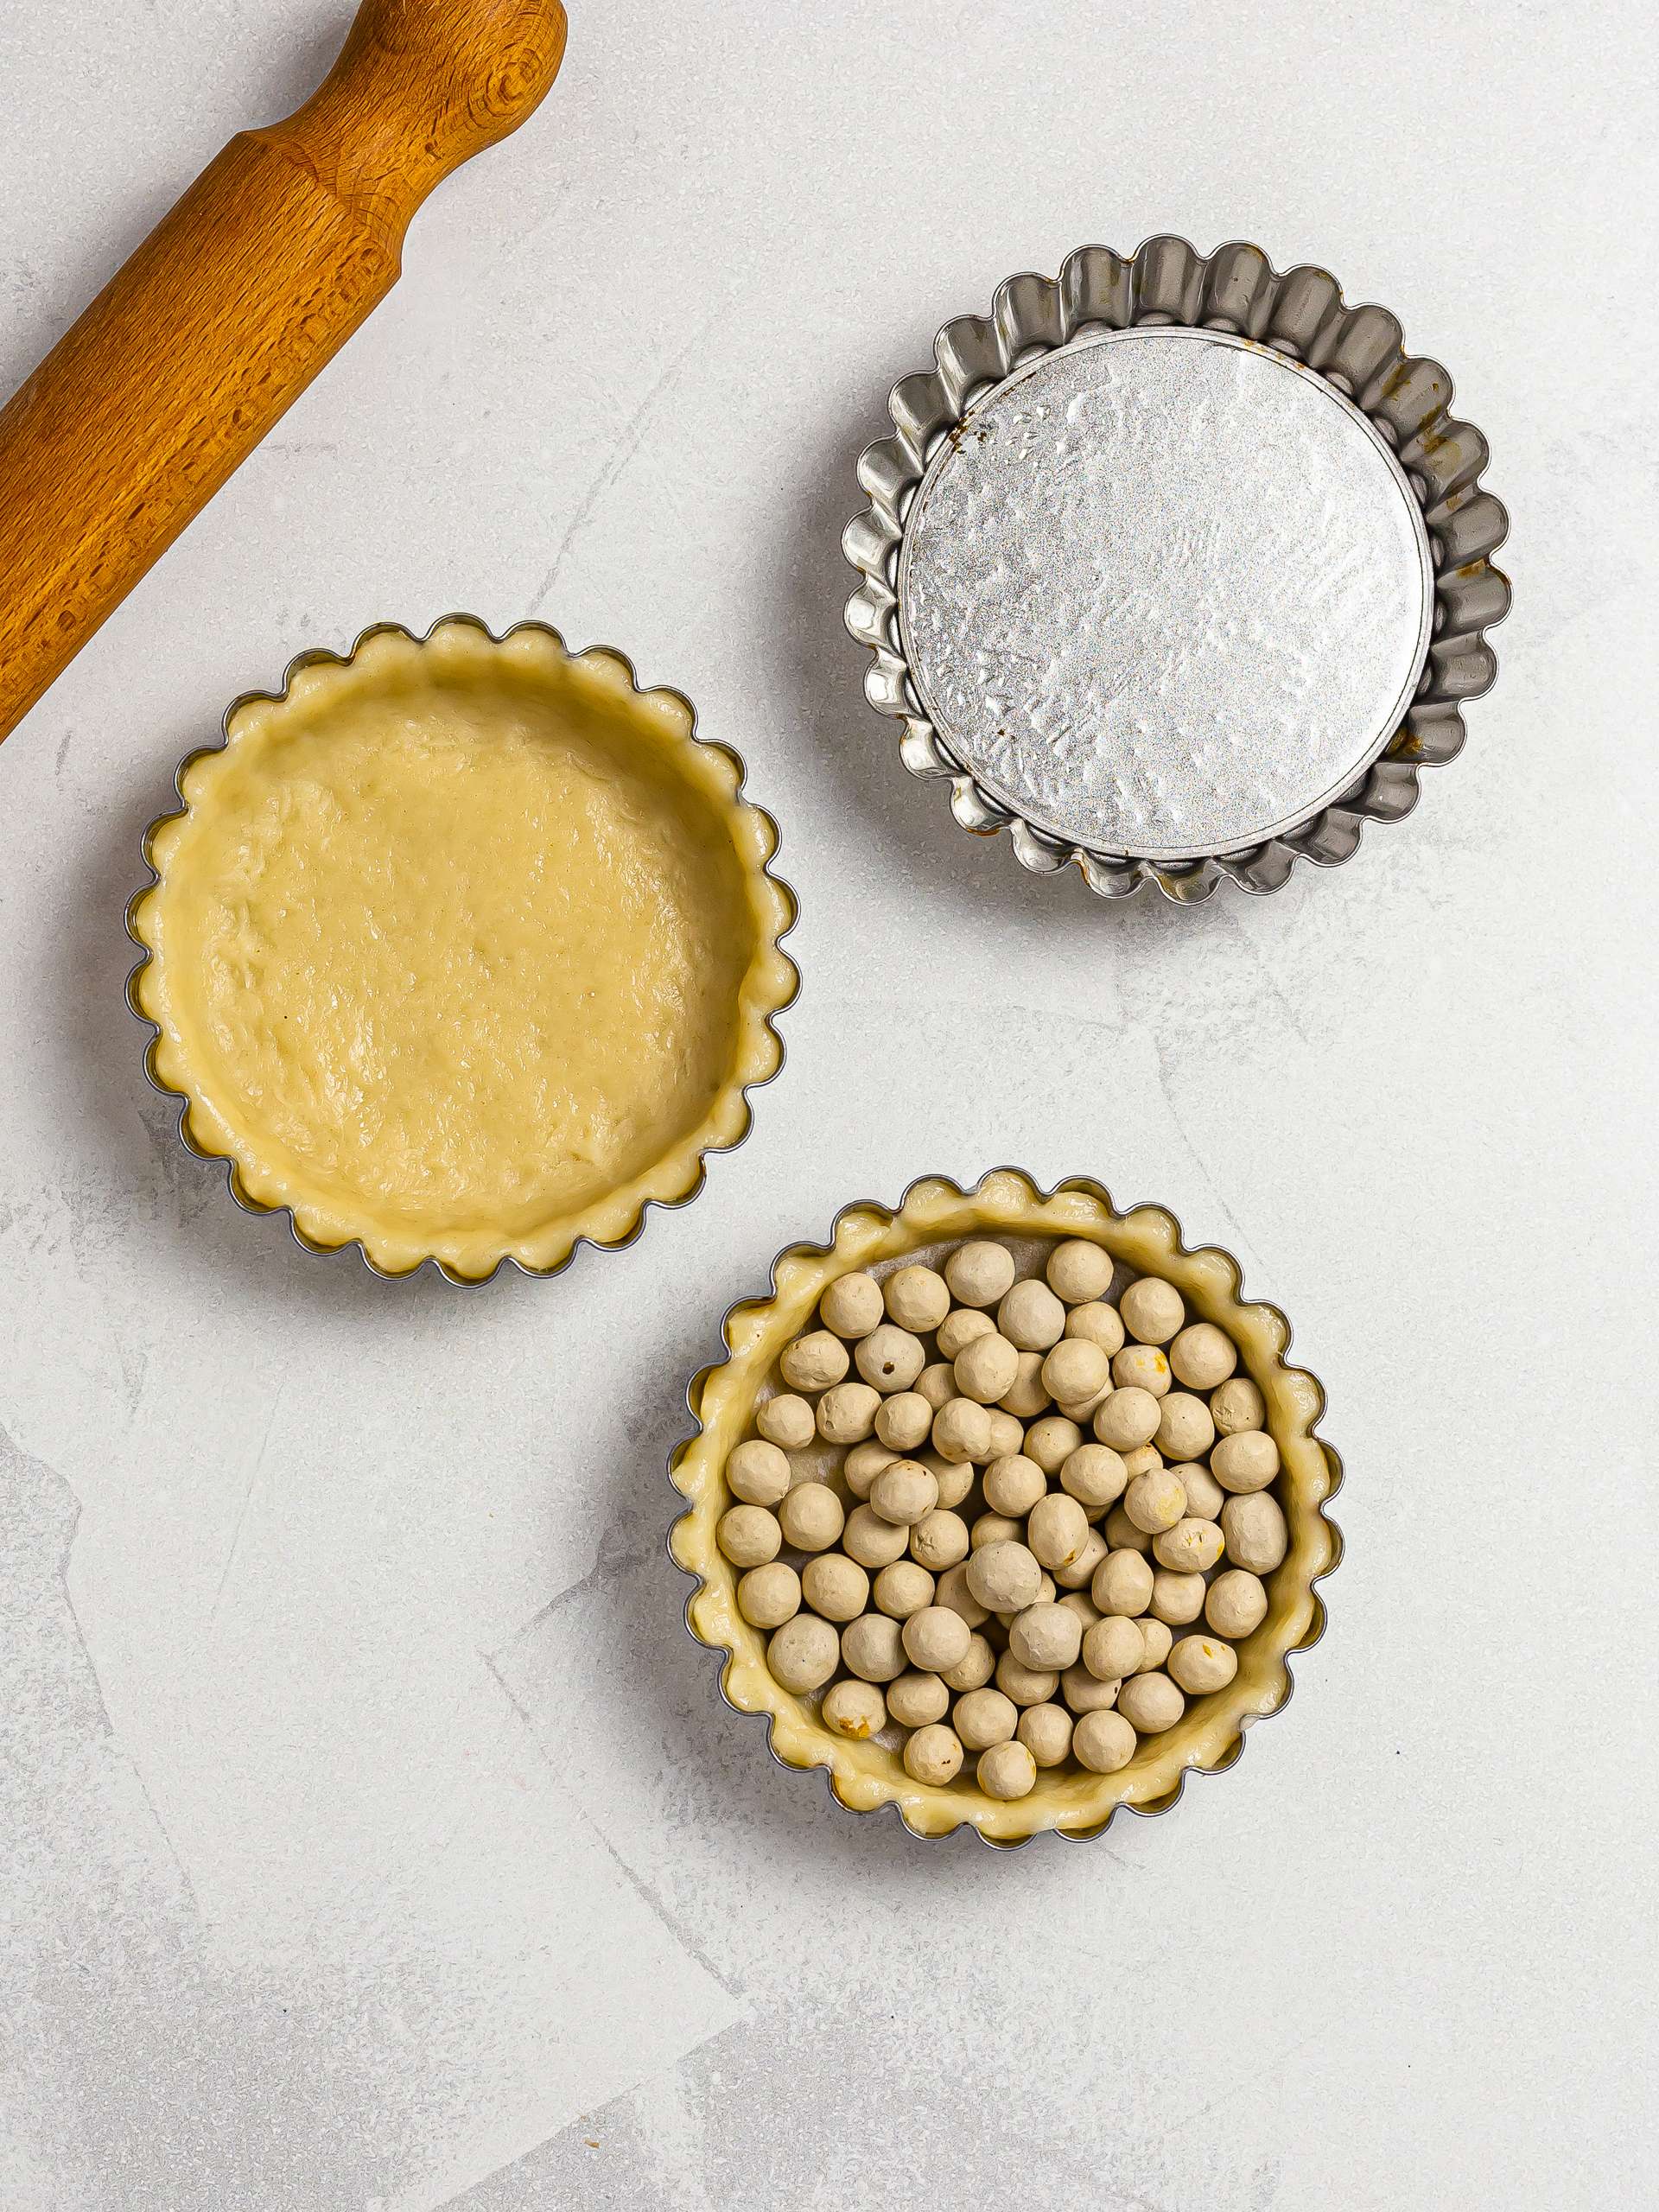 tart tins with pastry dough and baking beads for mont blanc tarts